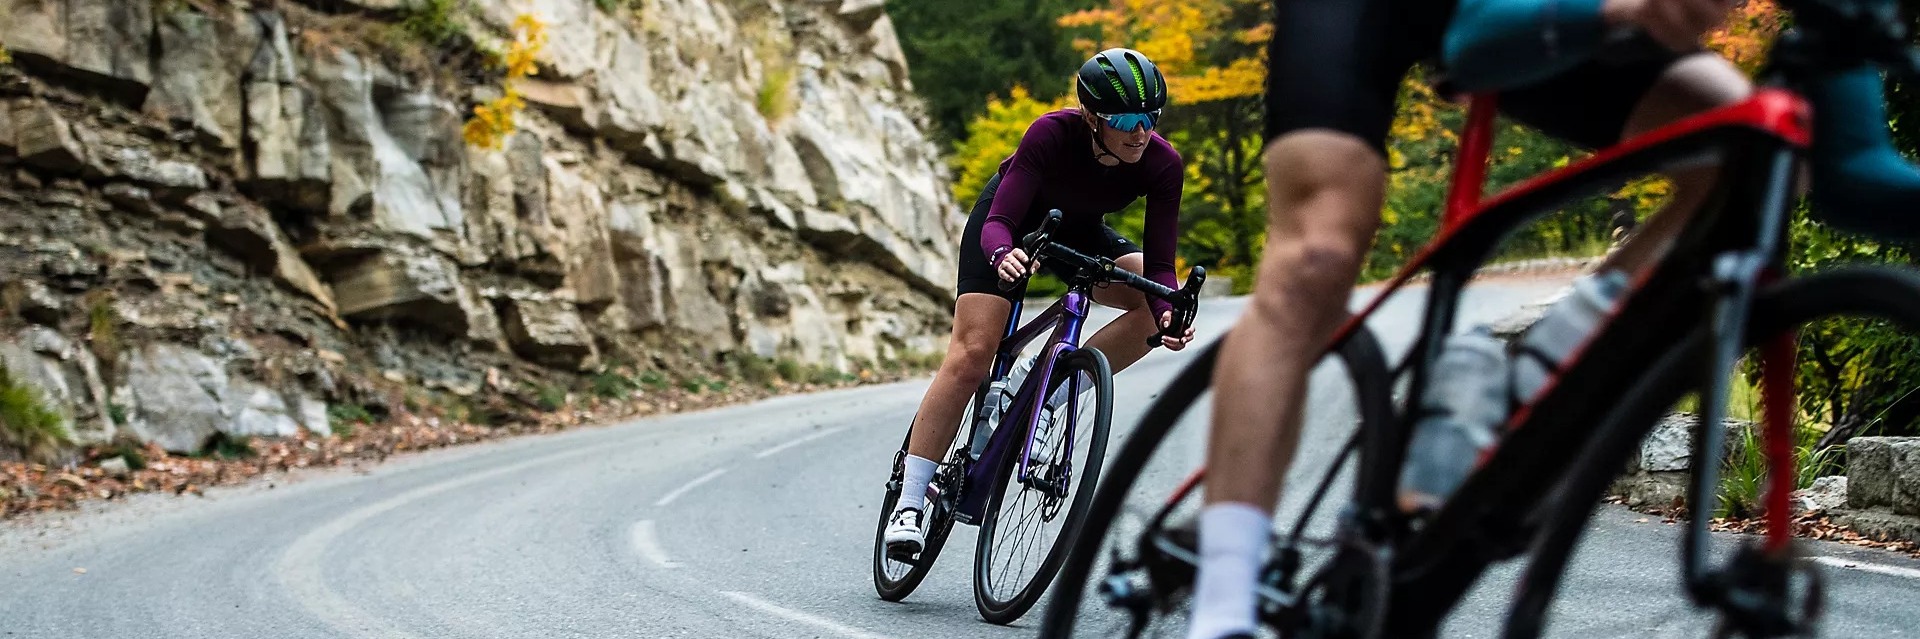 Own the road with the Domane+ LT